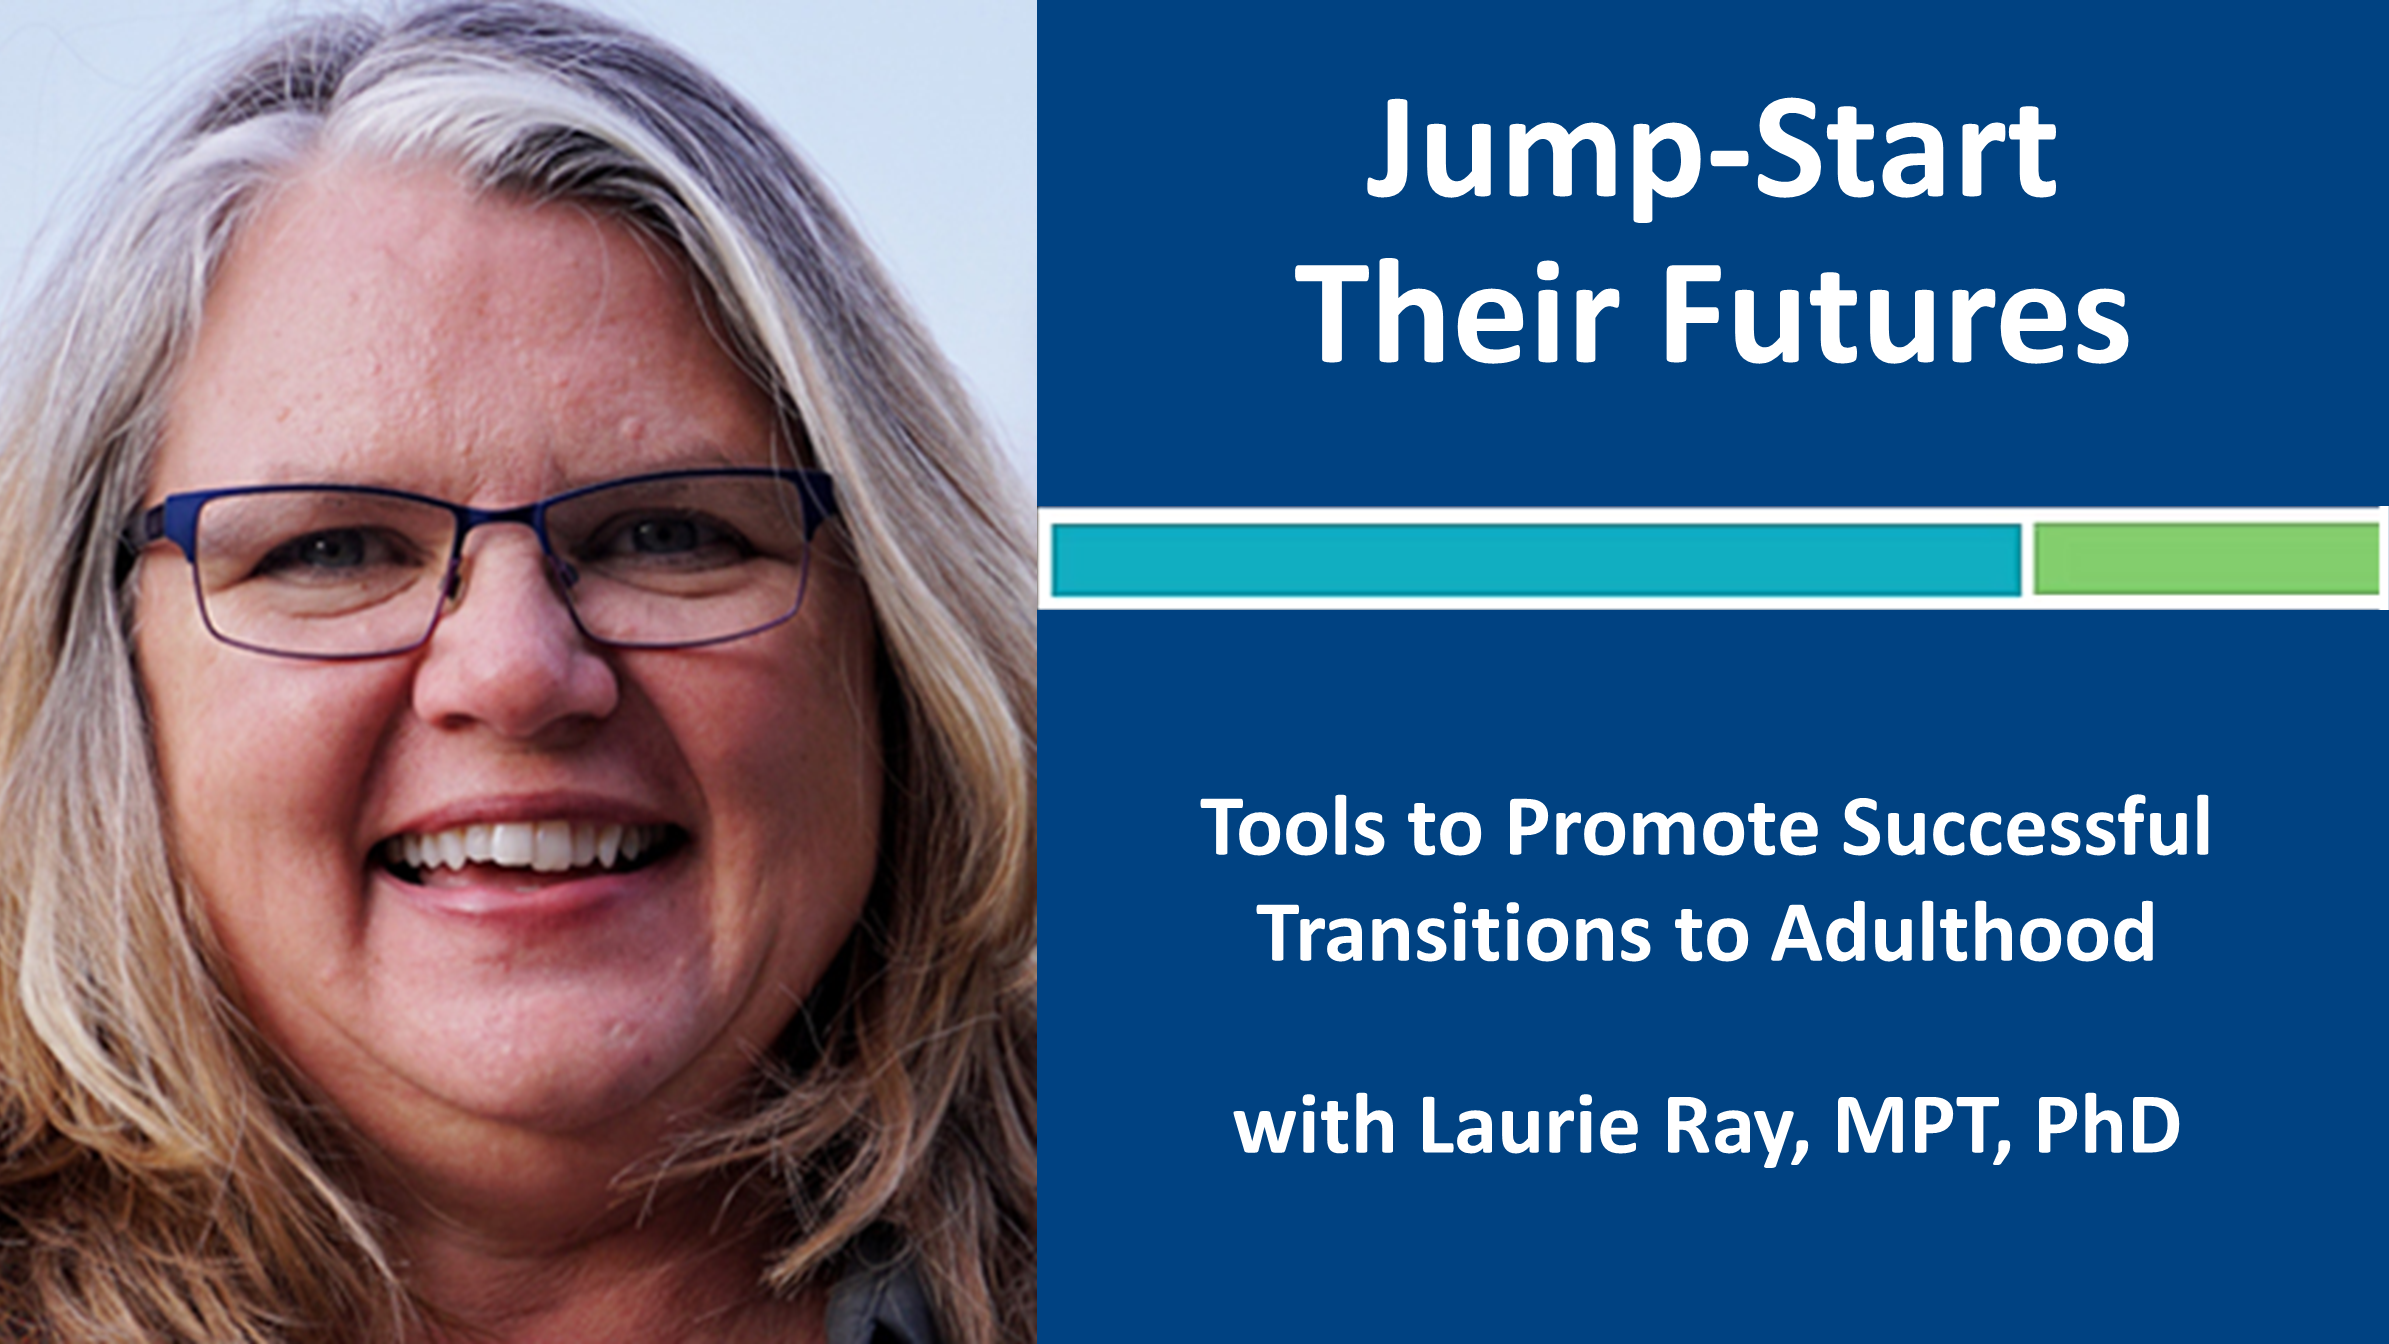 Webinar 8: Jump-Start Their Futures with Laurie Ray, MPT, PhD